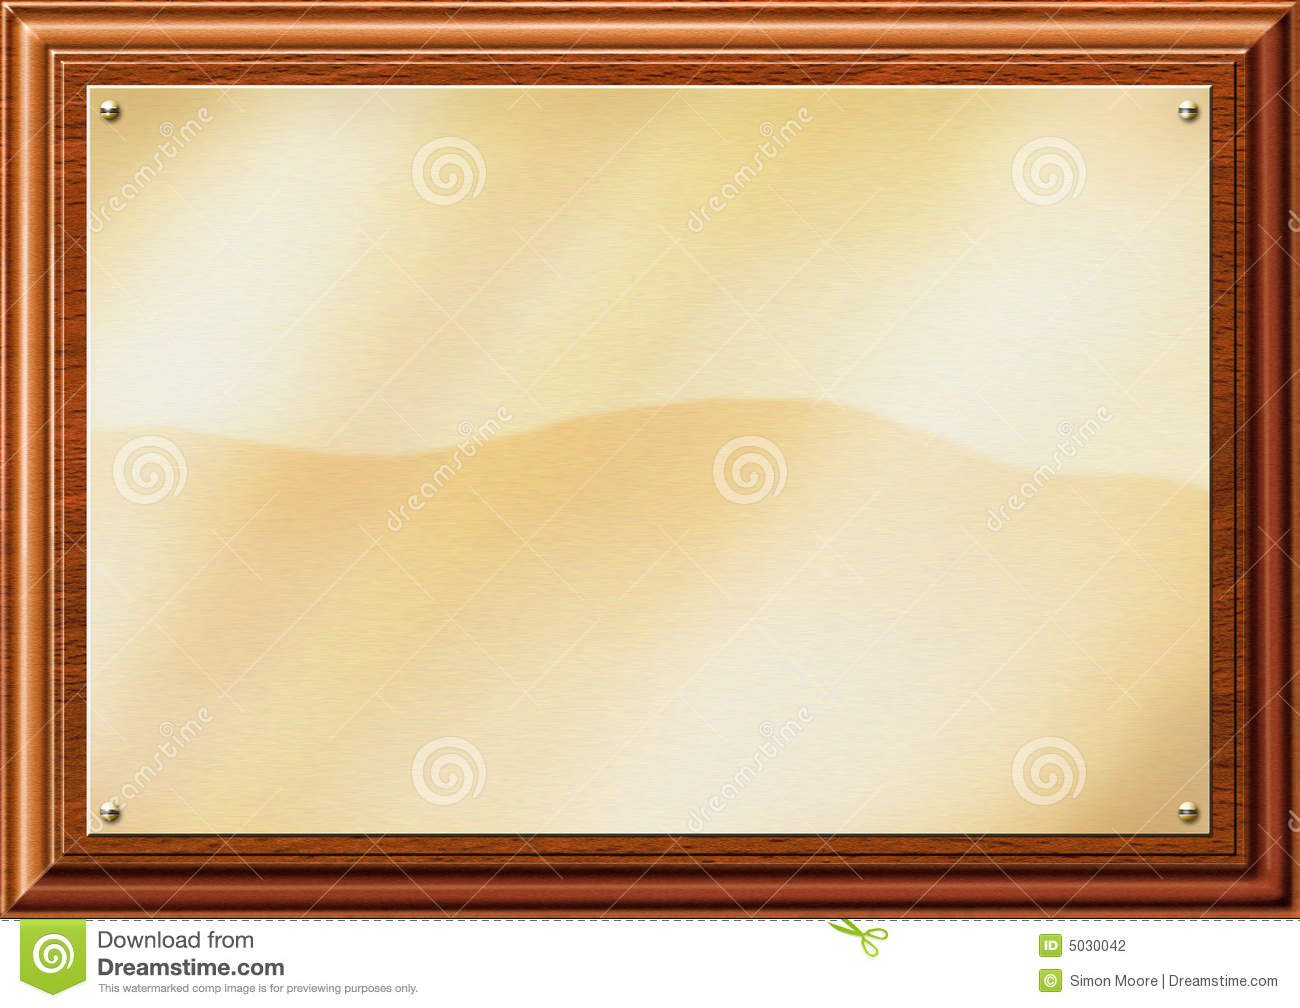 Brass Plaque Illustration Stock Photography   Image  5030042